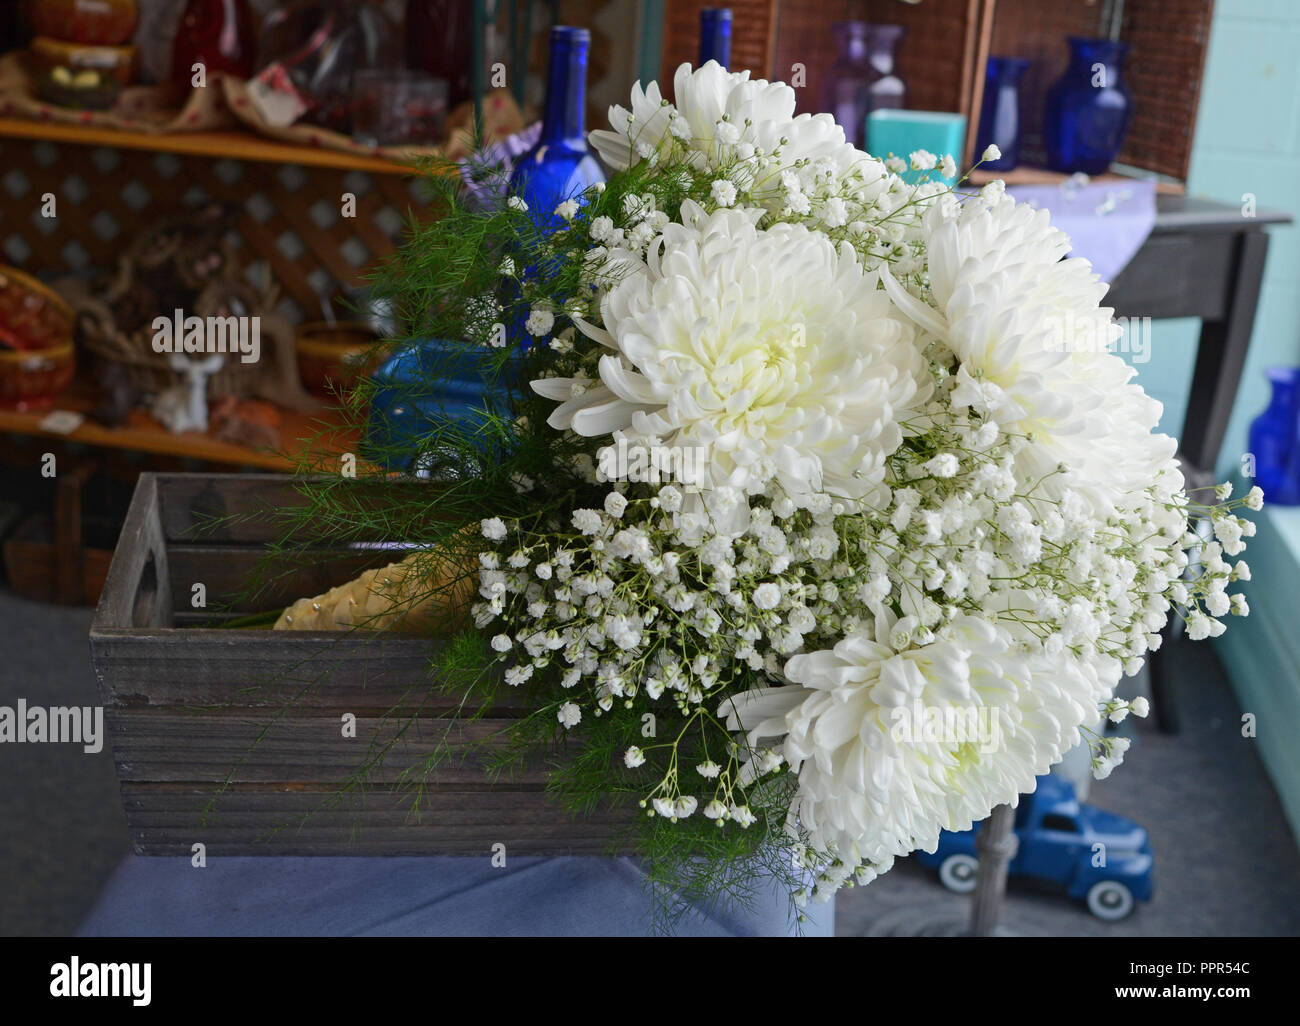 Closeup of a nosegay-style bridal bouquet with babies breath, delphinium, cushion mums. Stock Photo